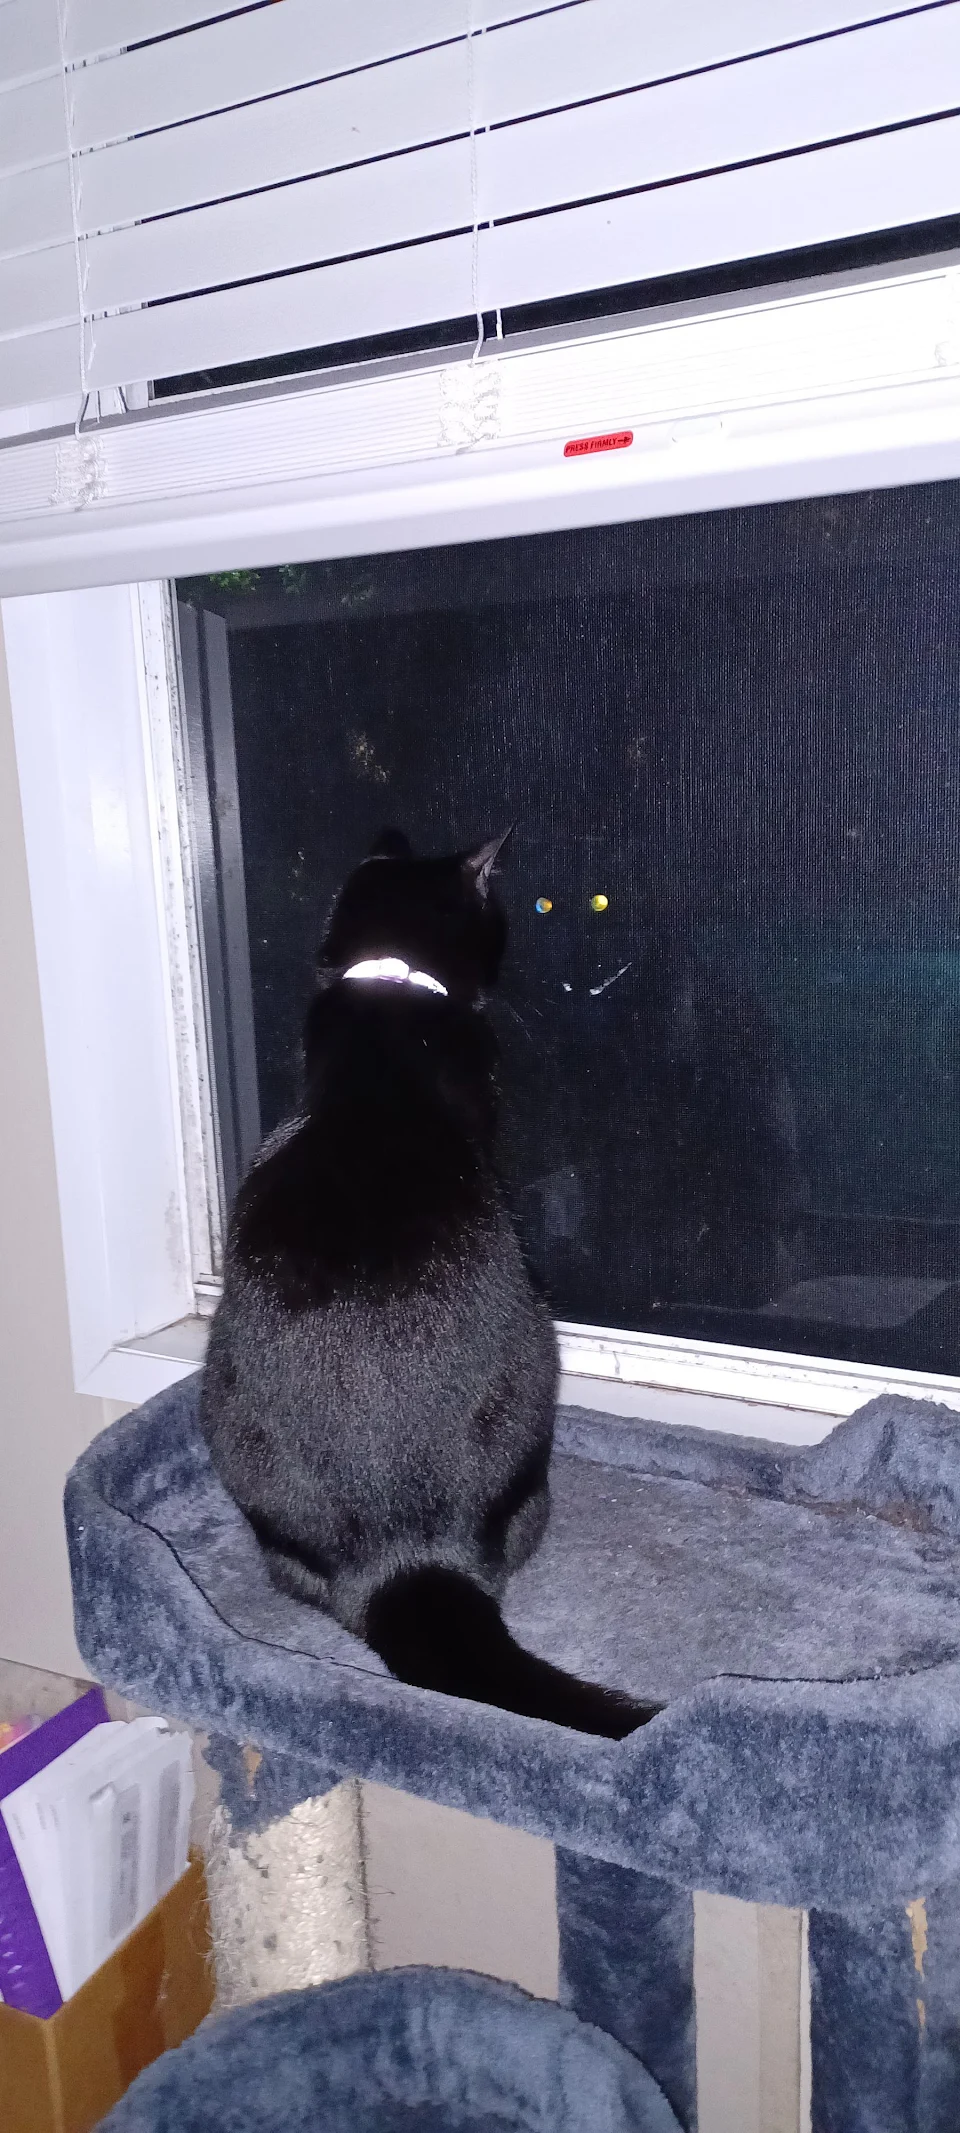 On Full Alert, It's Dark Outside and He Thinks There's Something Out There.